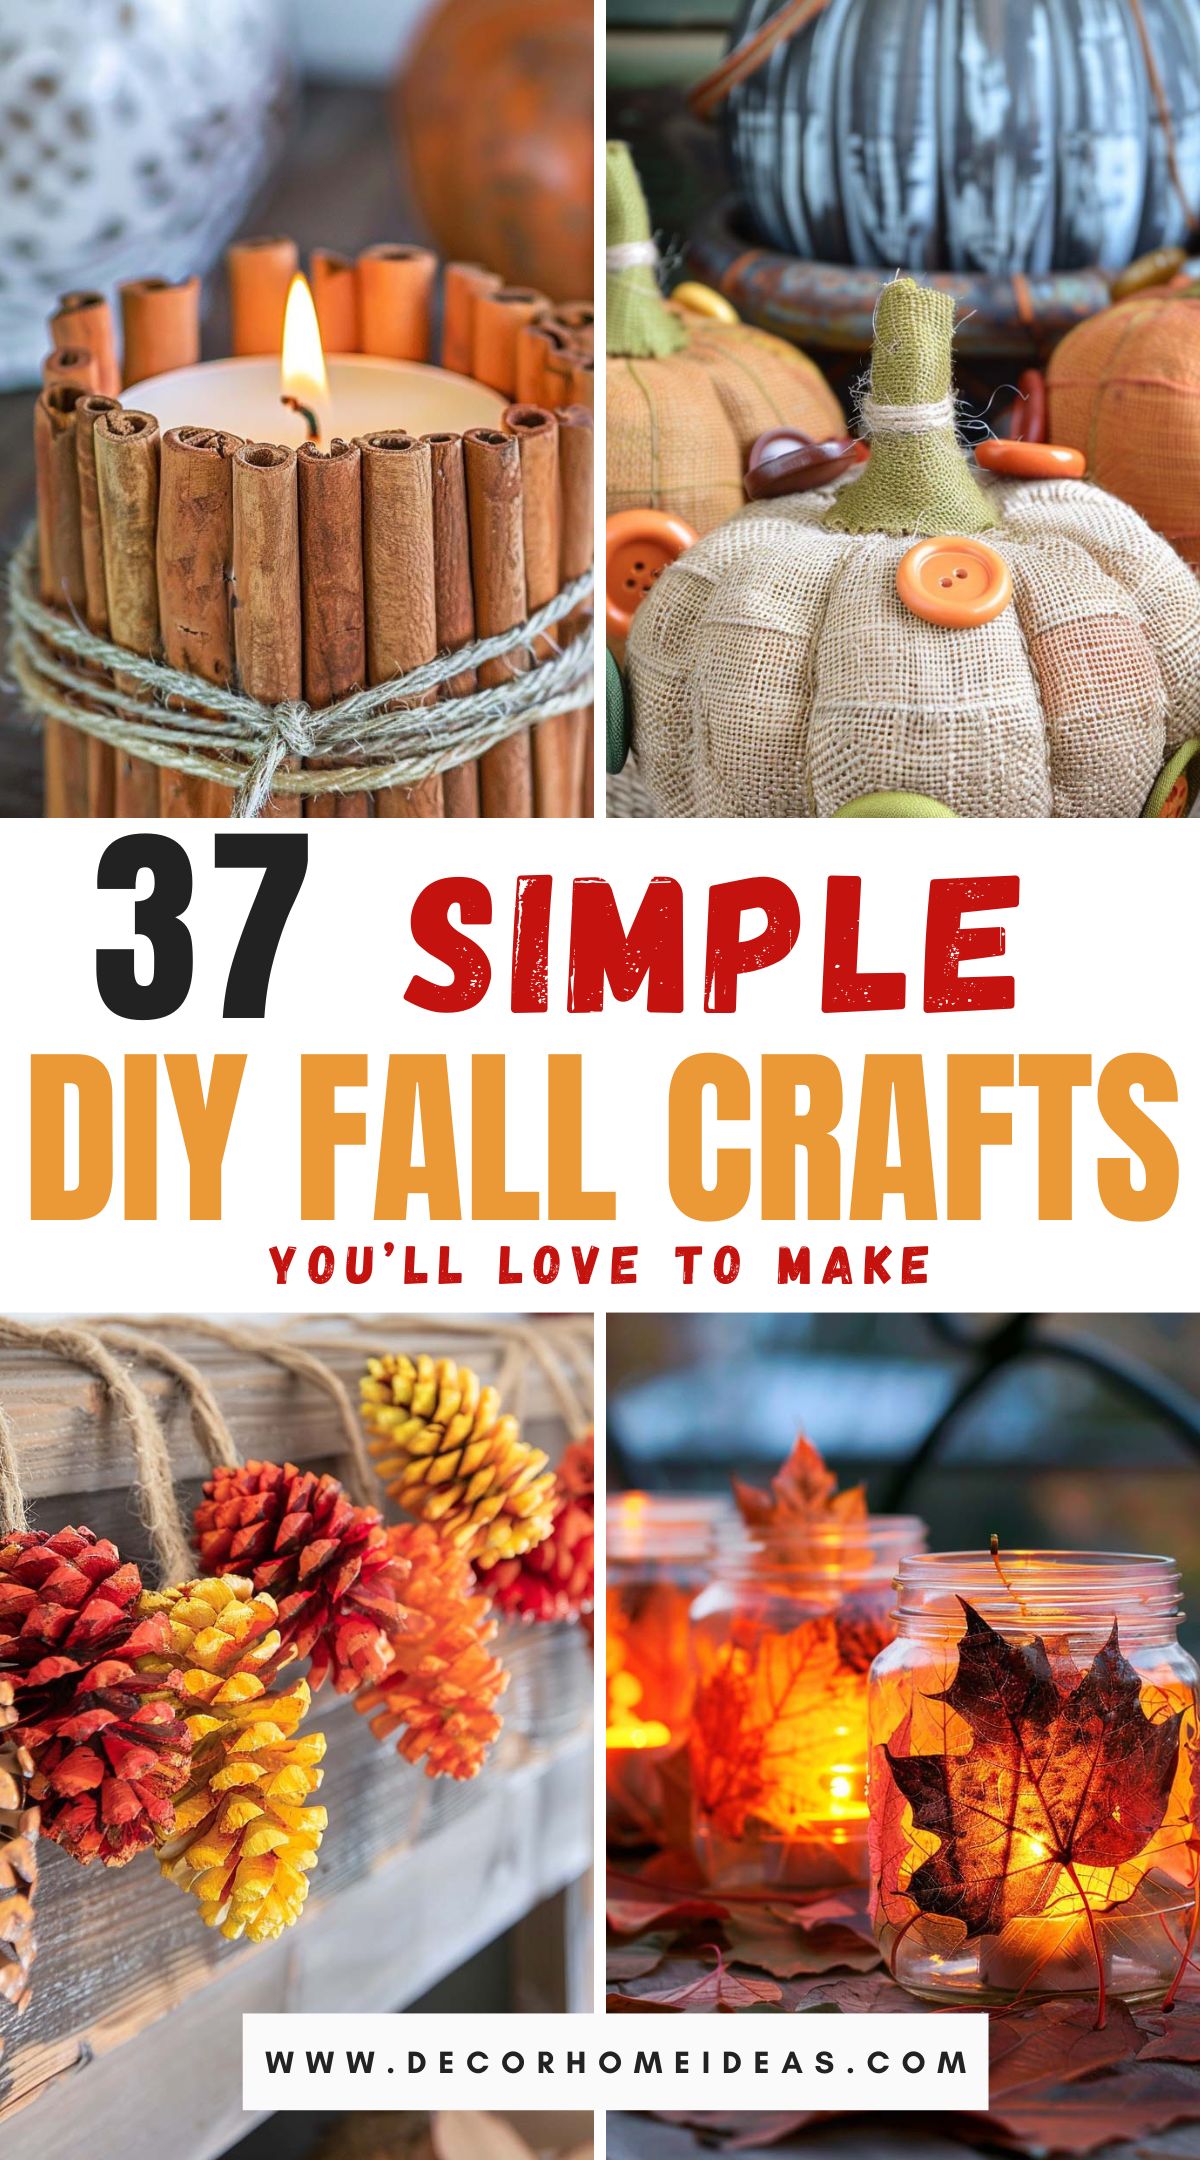 Discover 37 simple and fun DIY fall crafts you'll love to make. From cozy home decor and festive wreaths to creative pumpkin projects and personalized table settings, these crafts offer something for everyone. Dive into these easy-to-follow ideas that will add a touch of autumn charm to your home, providing a perfect opportunity to embrace the season's creativity and warmth.